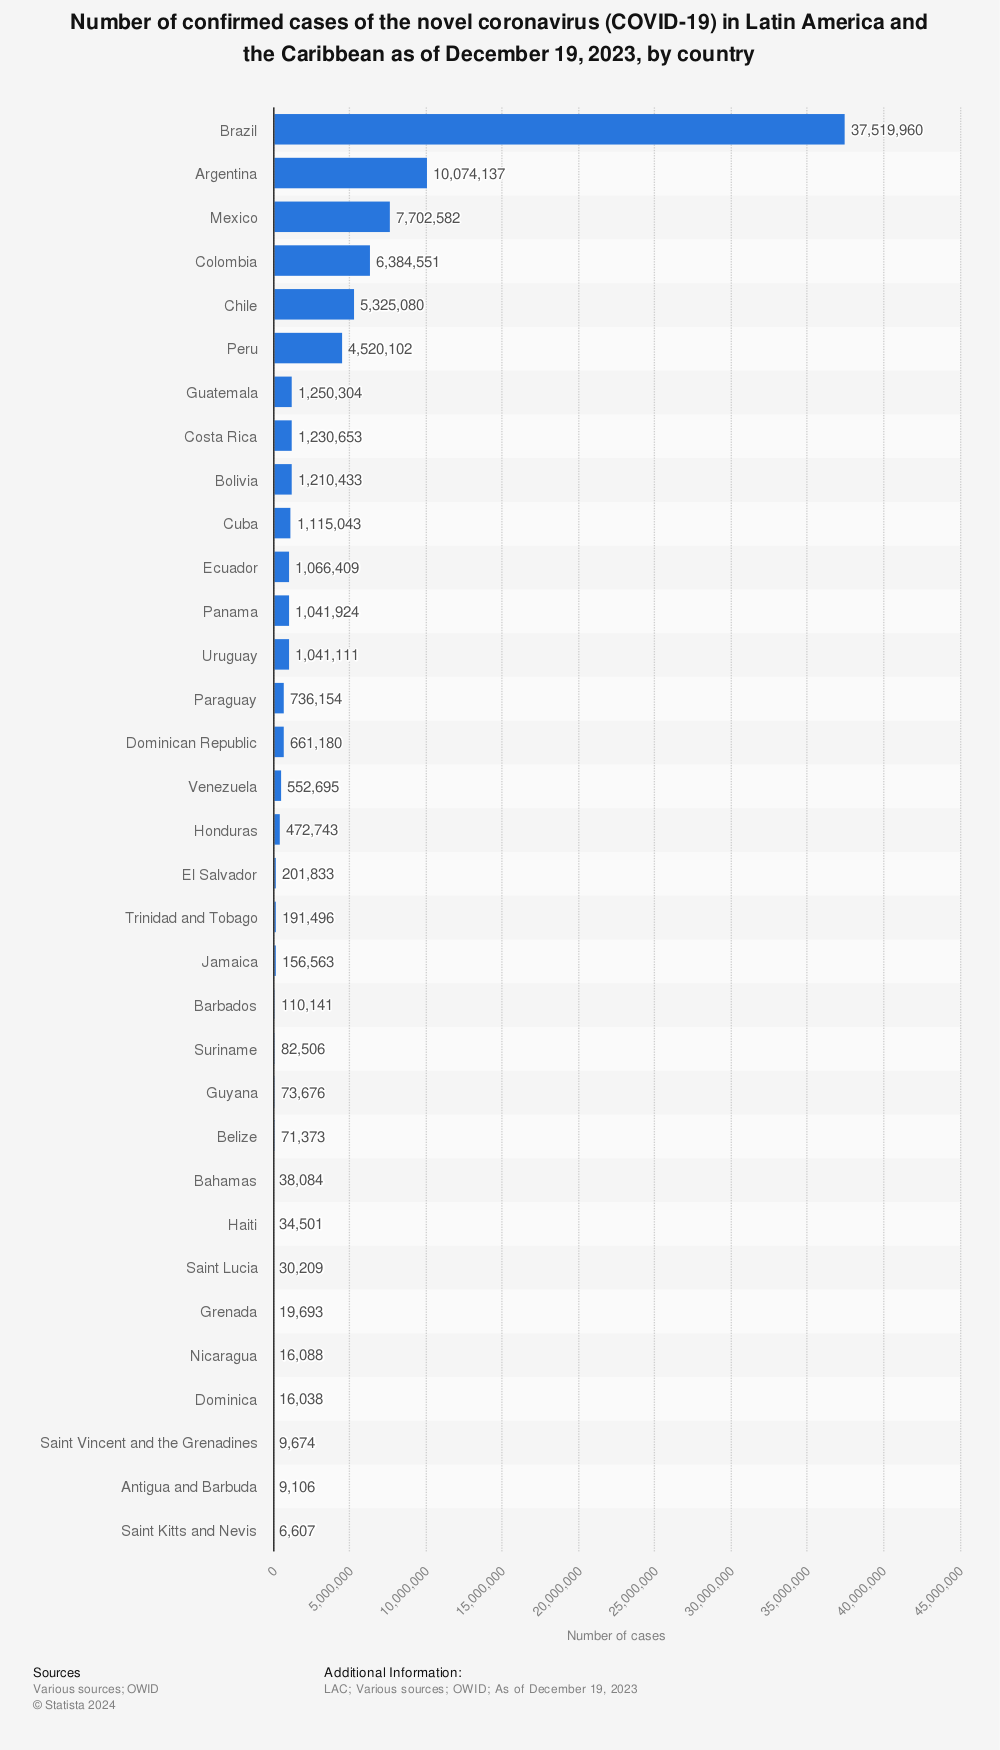 Statistic: Number of confirmed cases of novel coronavirus (COVID-19) in Latin America and the Caribbean as of April 1, 2020, by country | Statista